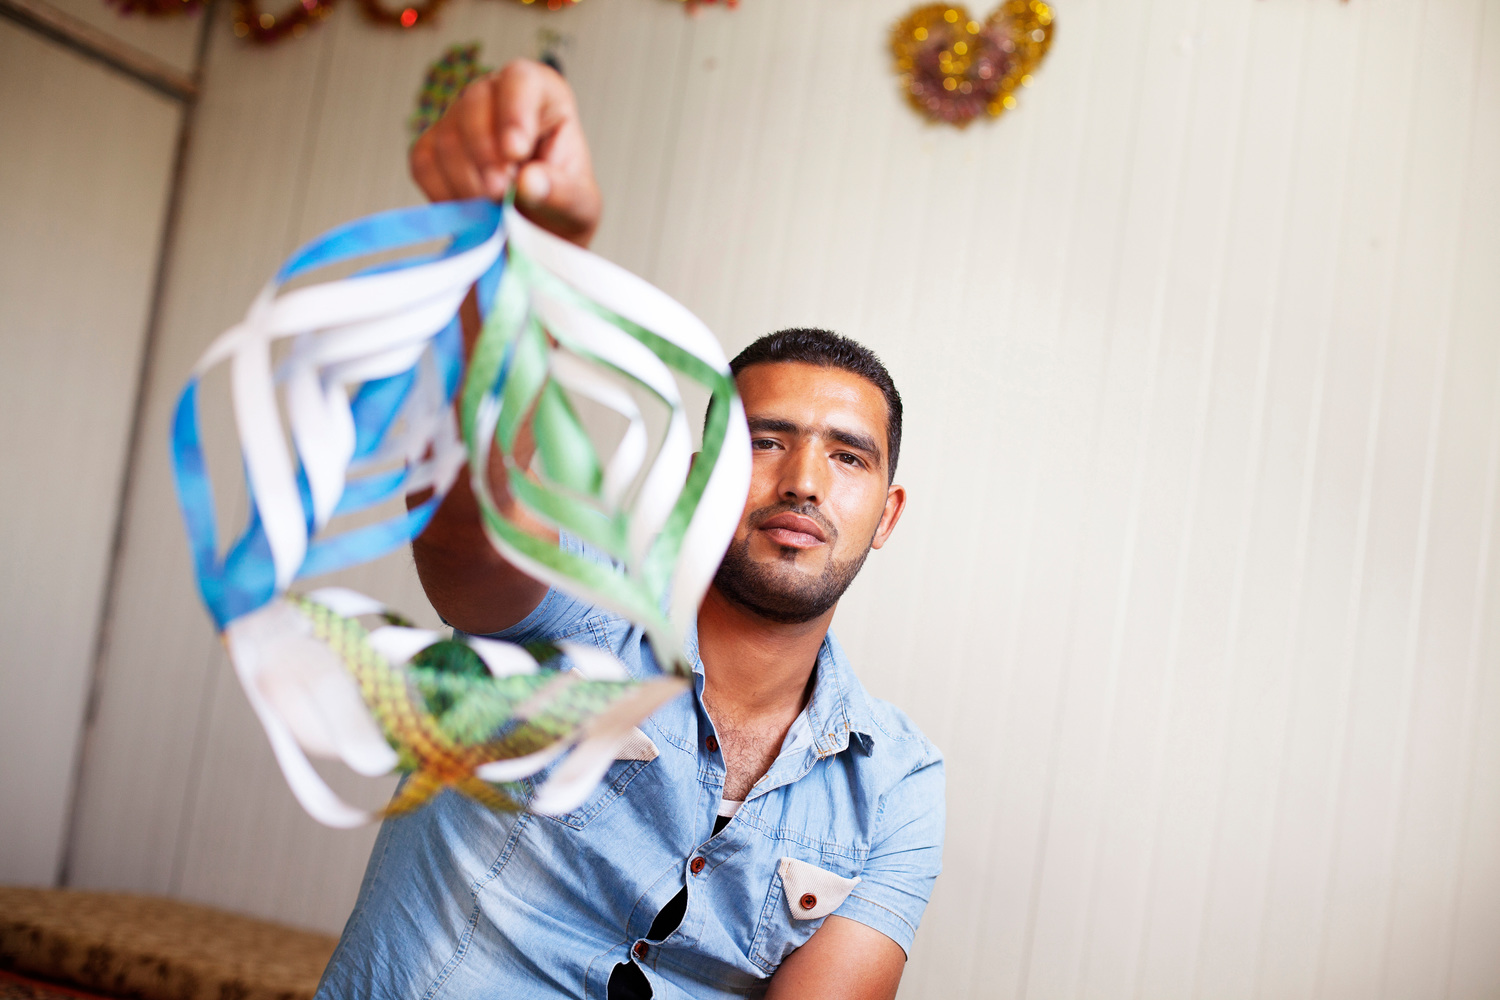 Jordan. 25-year-old Fadi Al Wali teaches origami to special needs children and other children at Za'atari refugee camp.